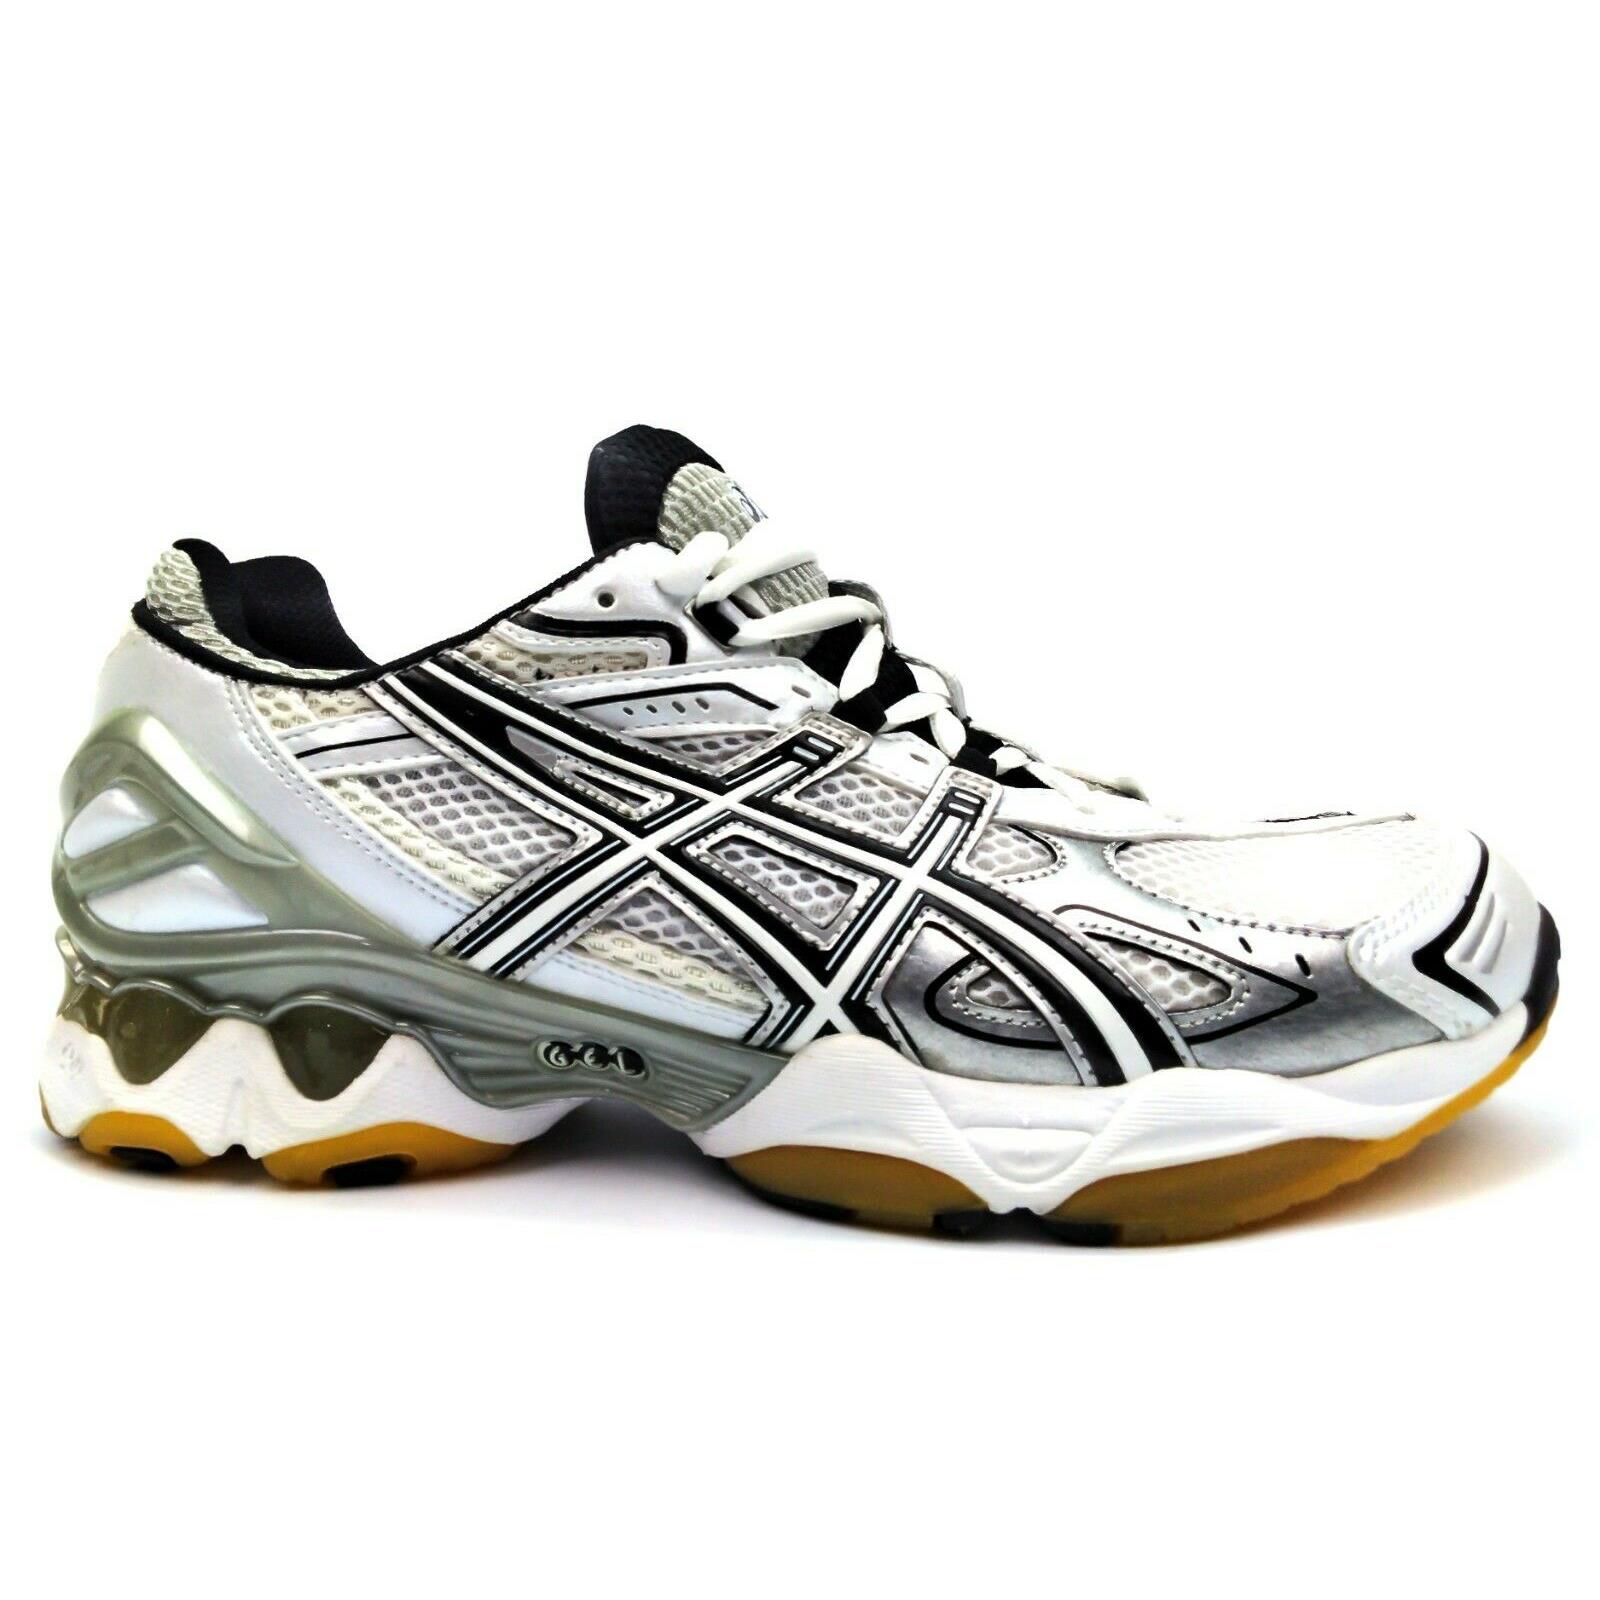 Asics Women`s Gel Volleycross 3 Volleyball Shoes White Black Silver